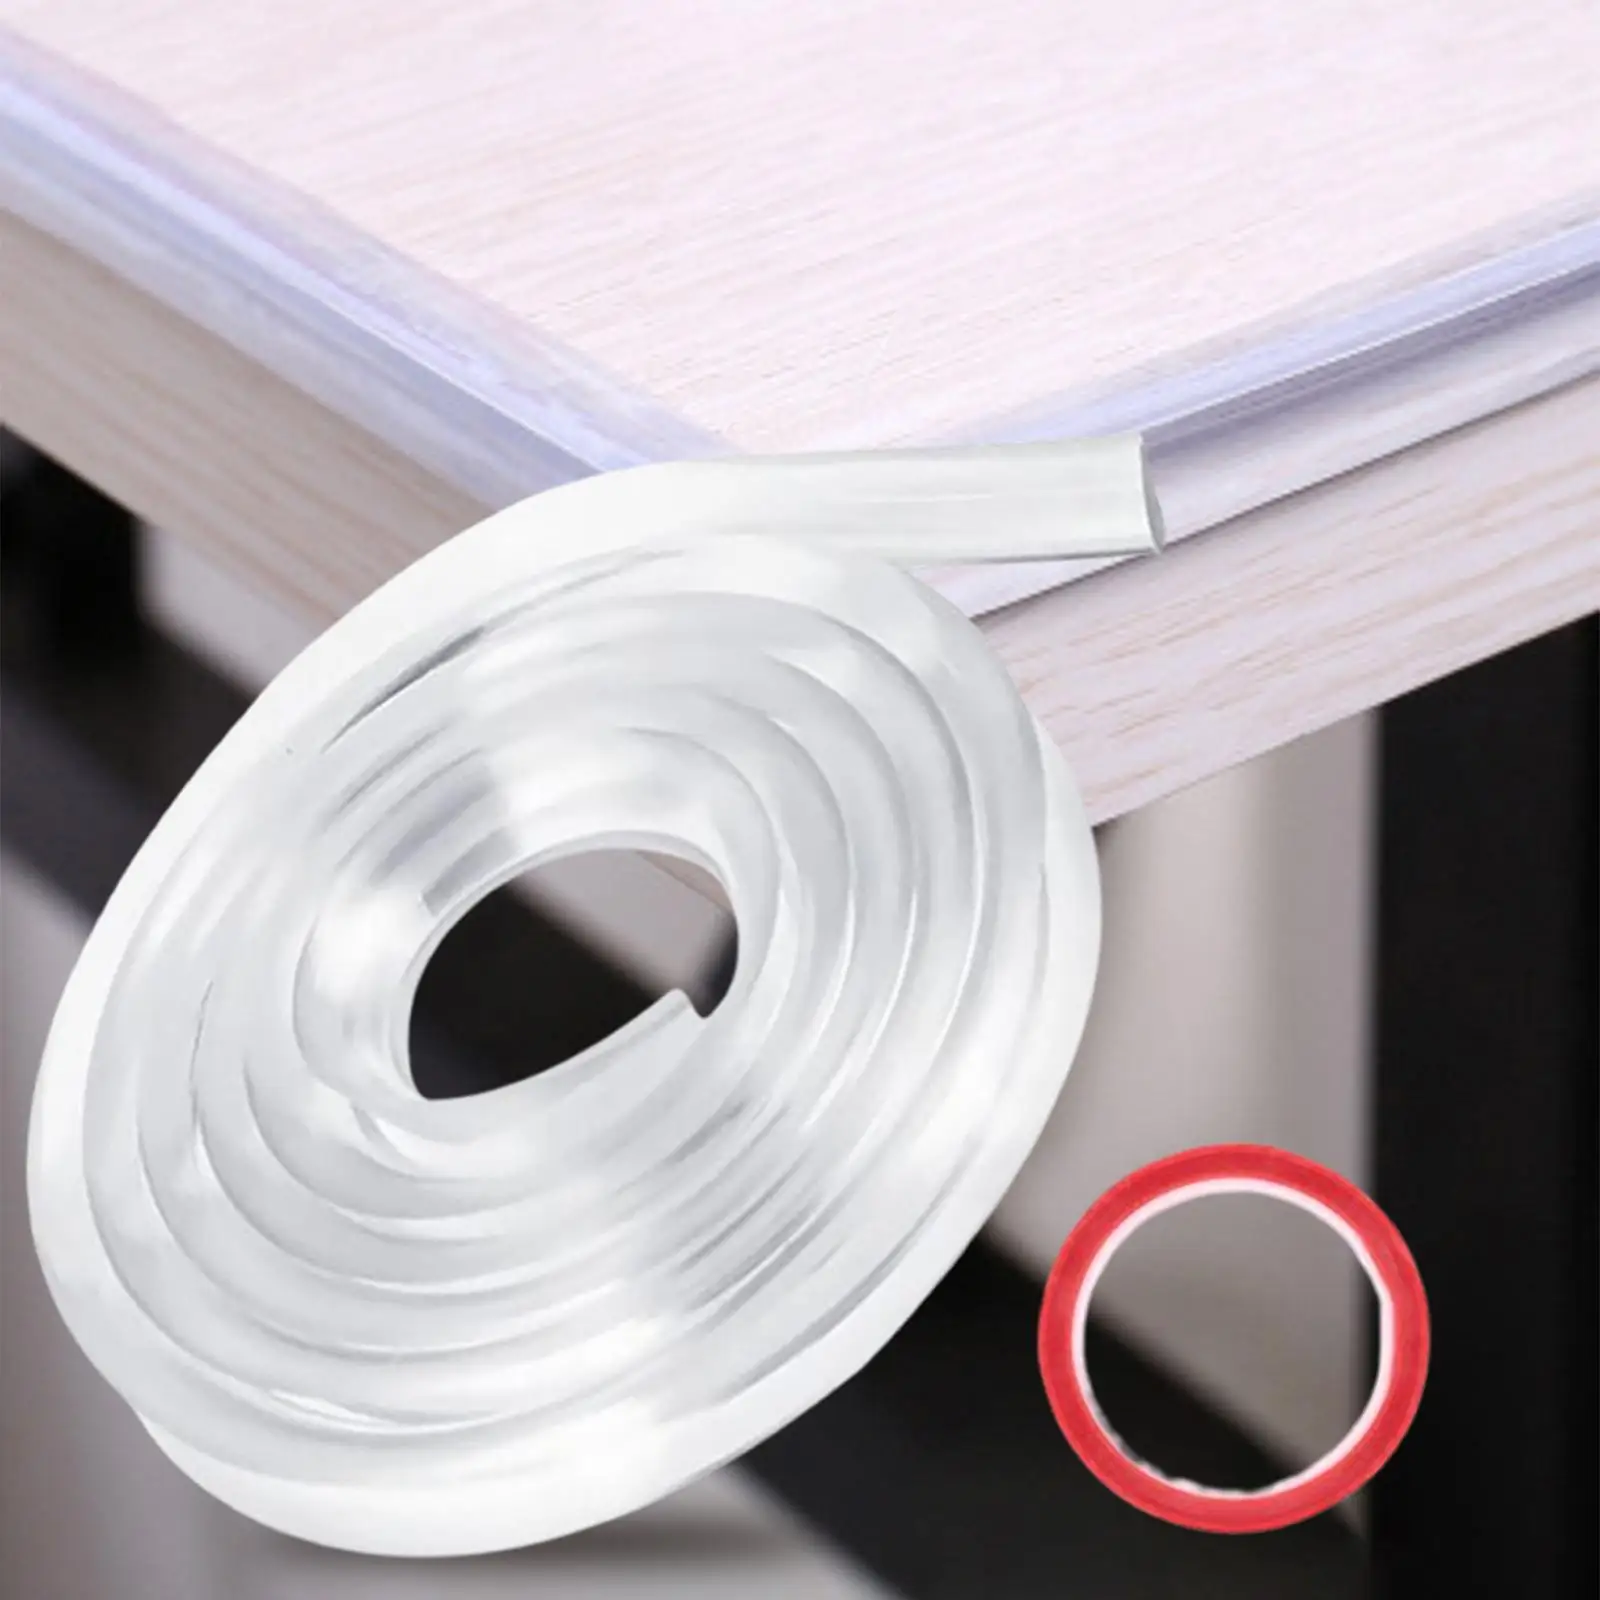   Strip Strip with Tape Against Sharp Corners  Corner Cushions  13 Baby Table Edge Child Desk